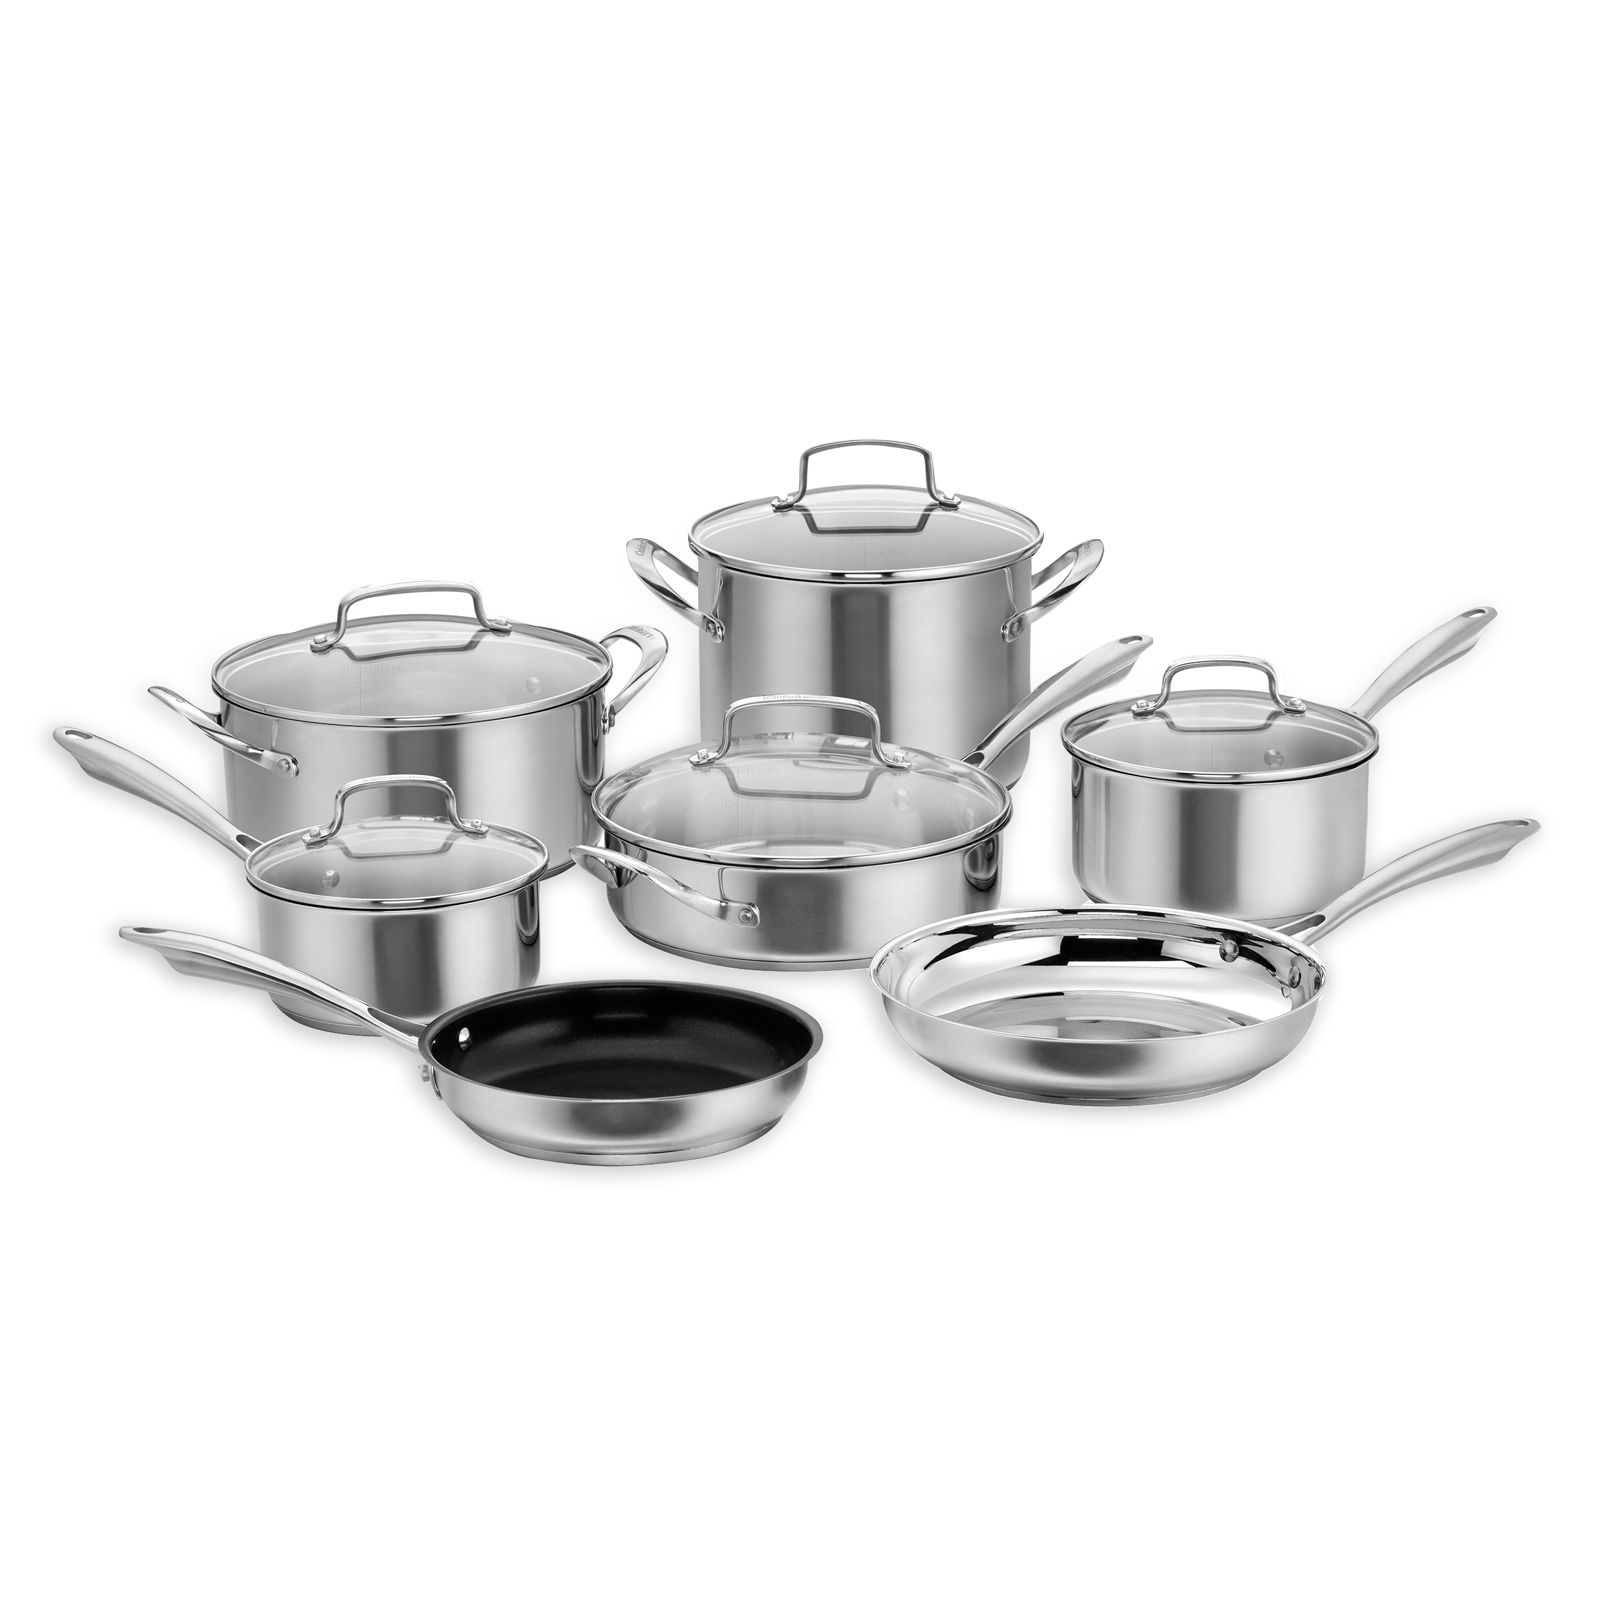 Cuisinart Professional 12-Pc. Stainless Cookware Set